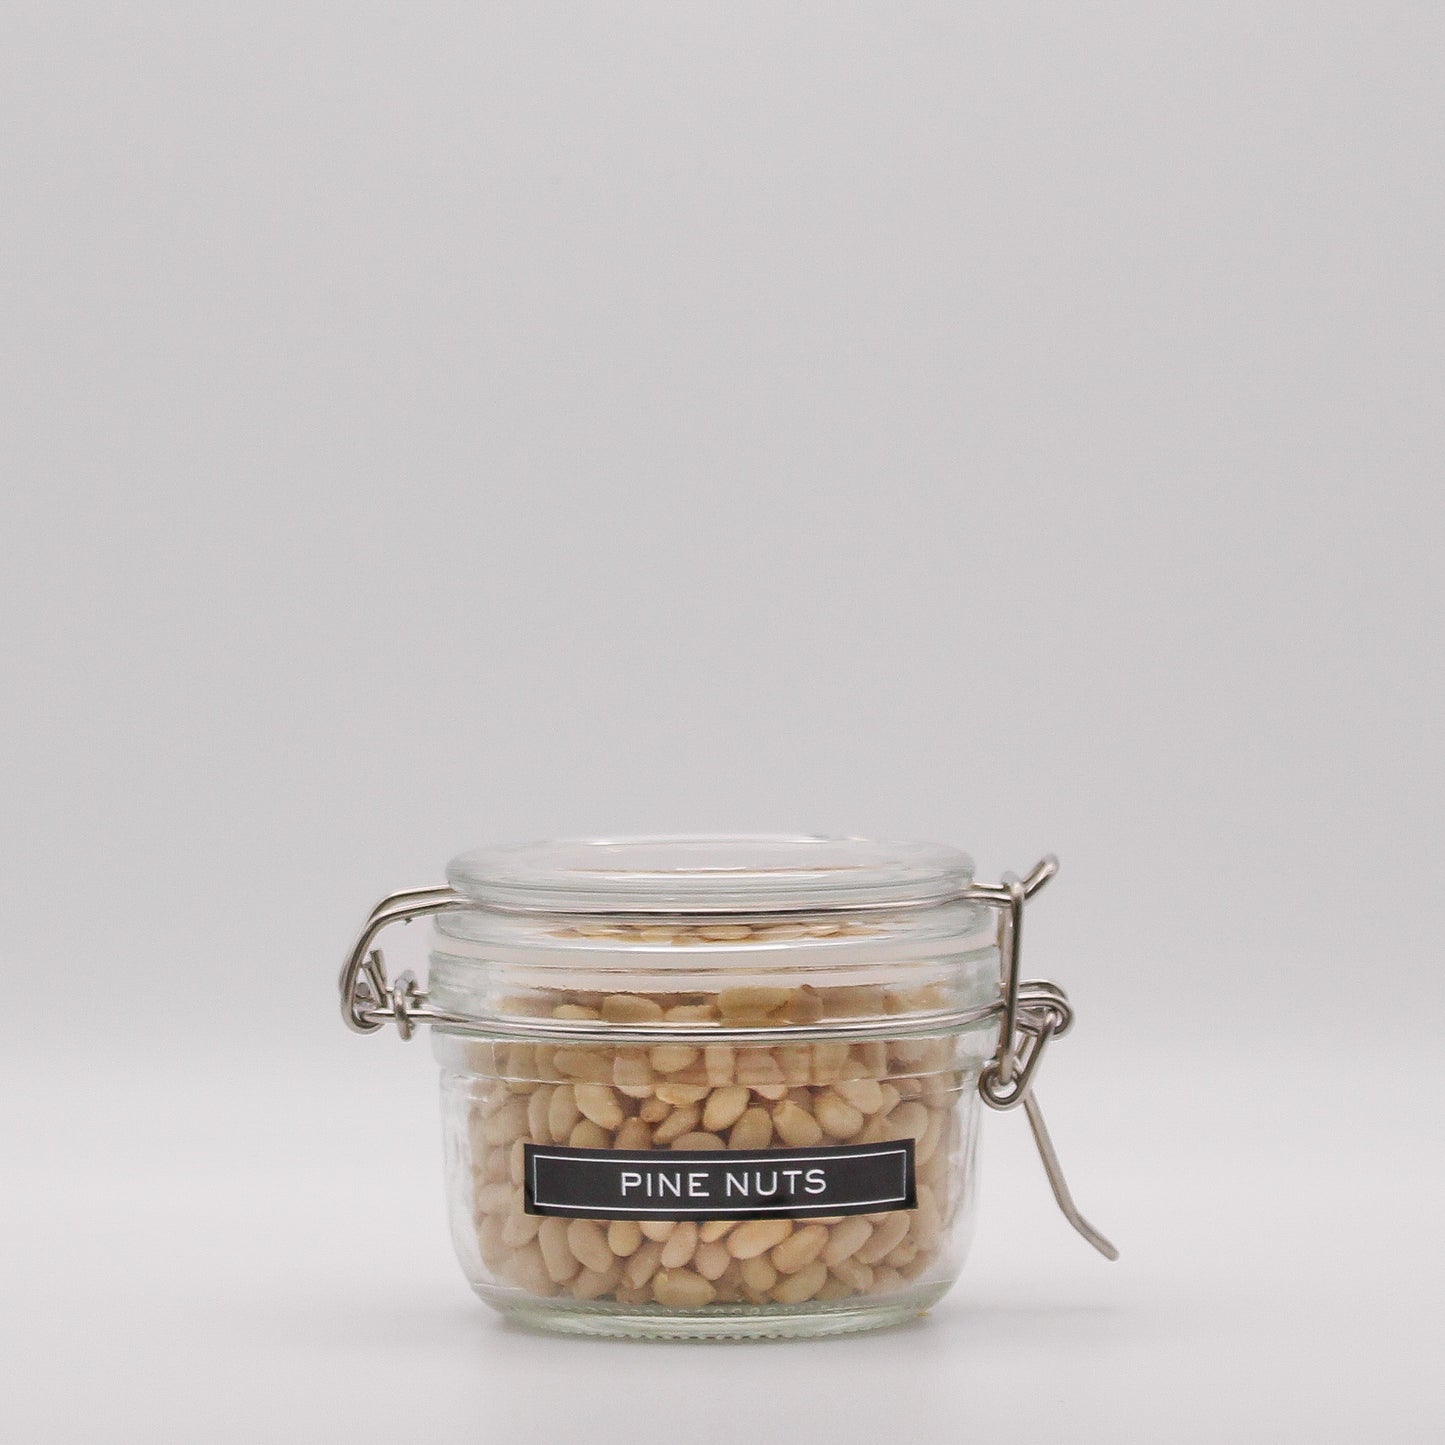 Pine Nuts - 80g